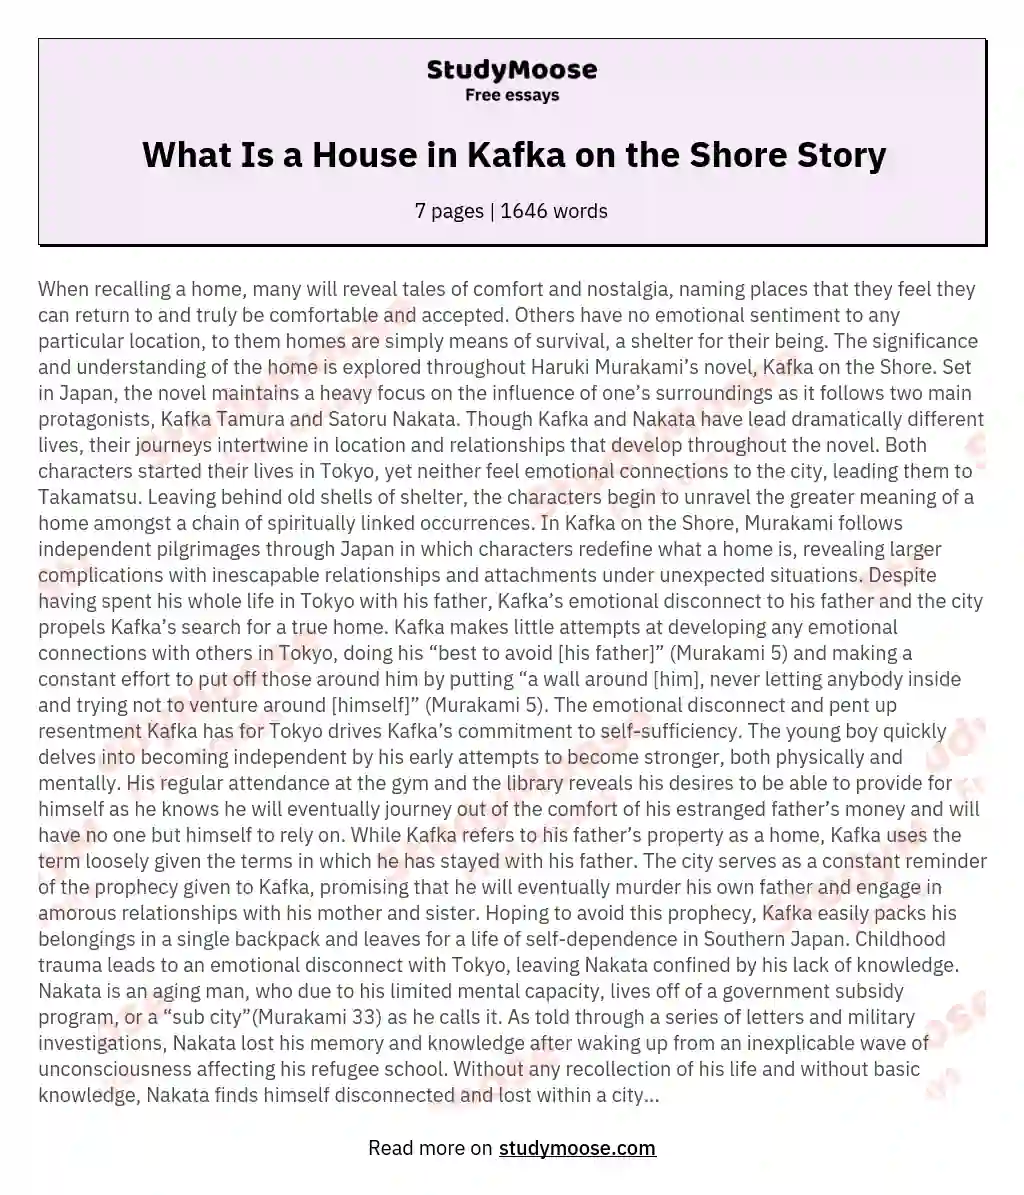 What Is a House in Kafka on the Shore Story essay